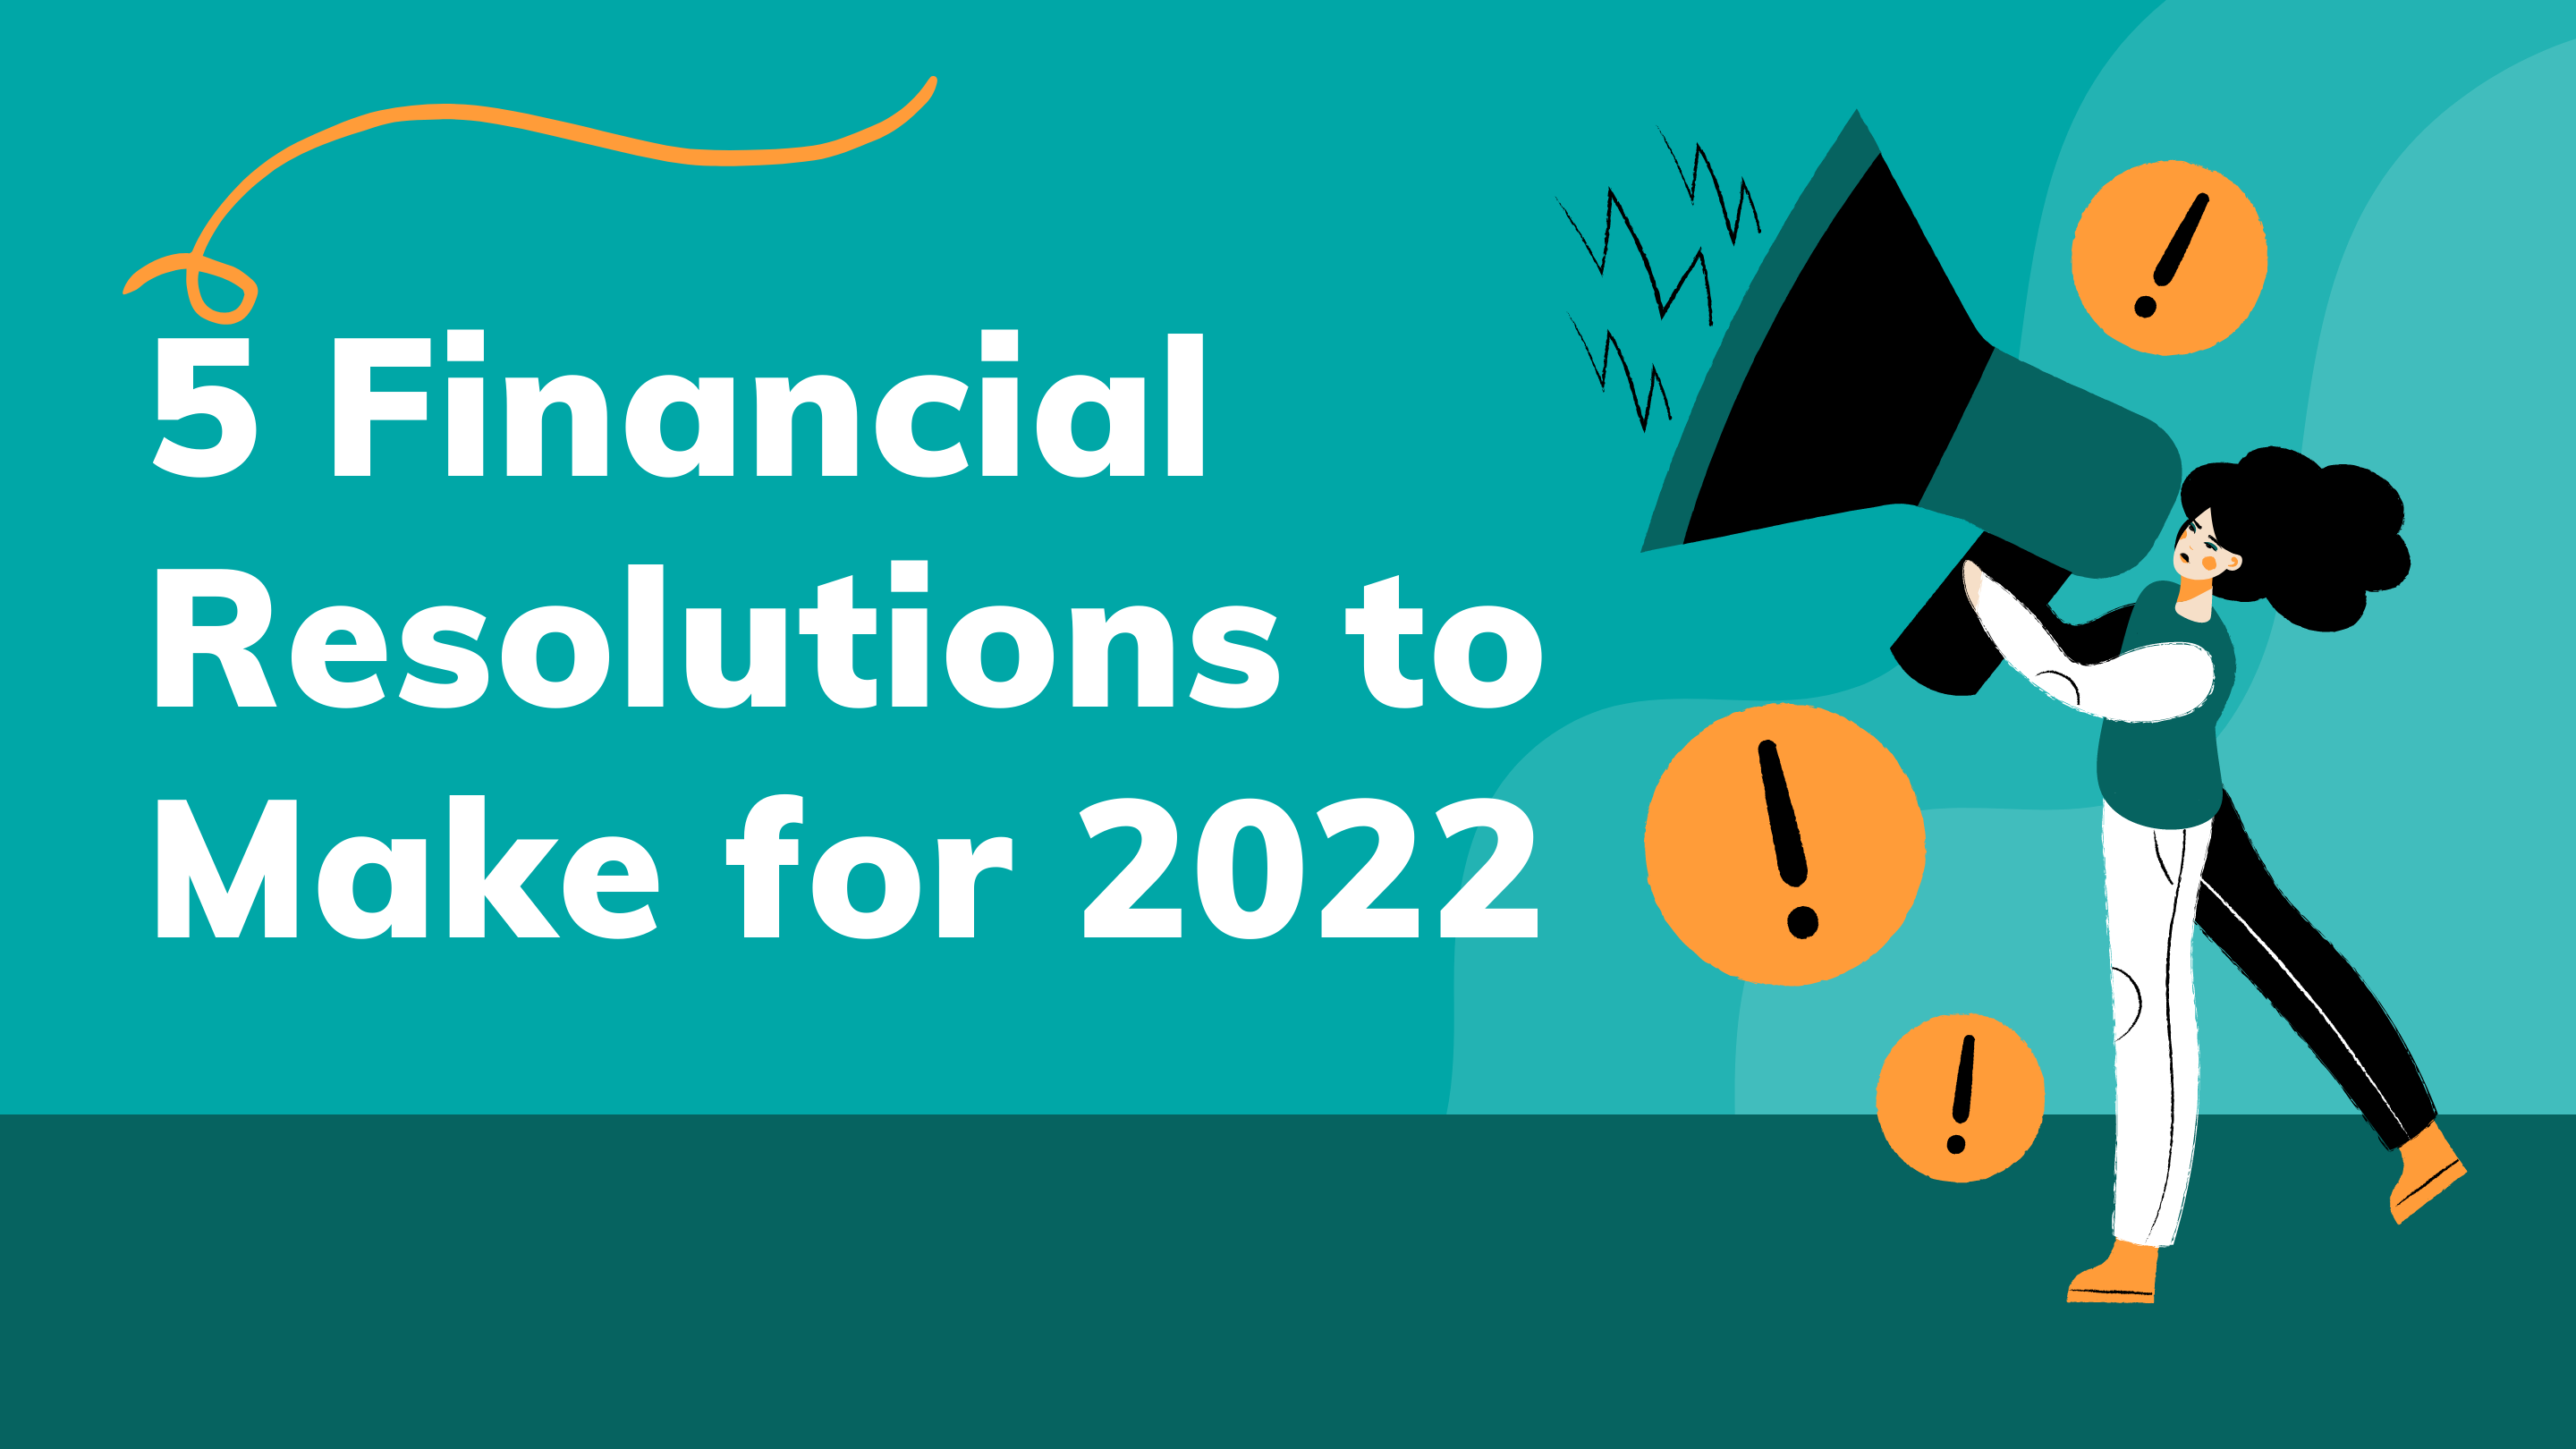 5 financial resolutions to make for 2022